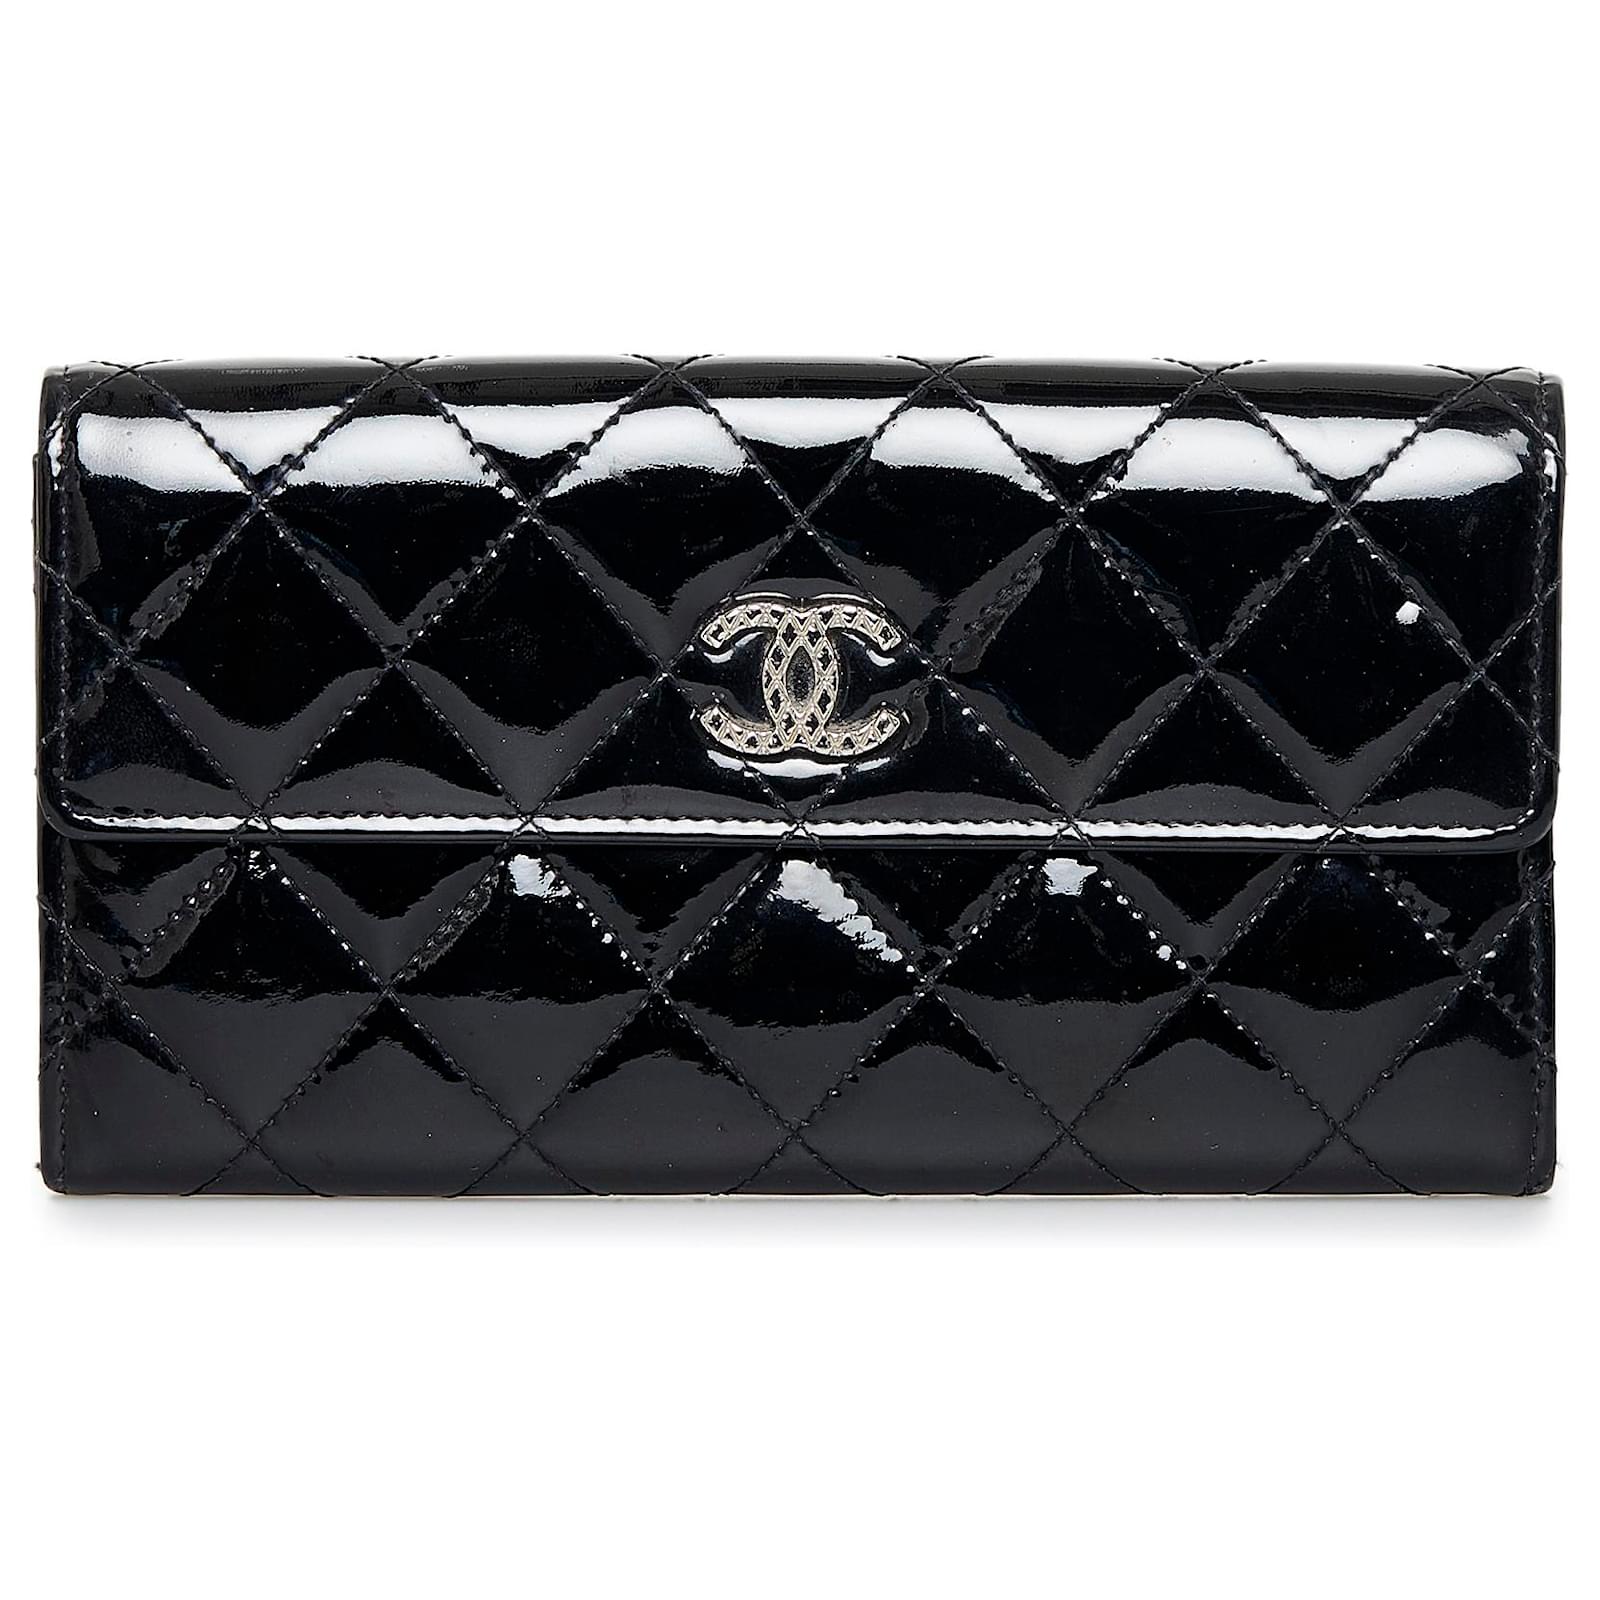 Chanel Black Brilliant Patent Flap Continental Wallet Leather